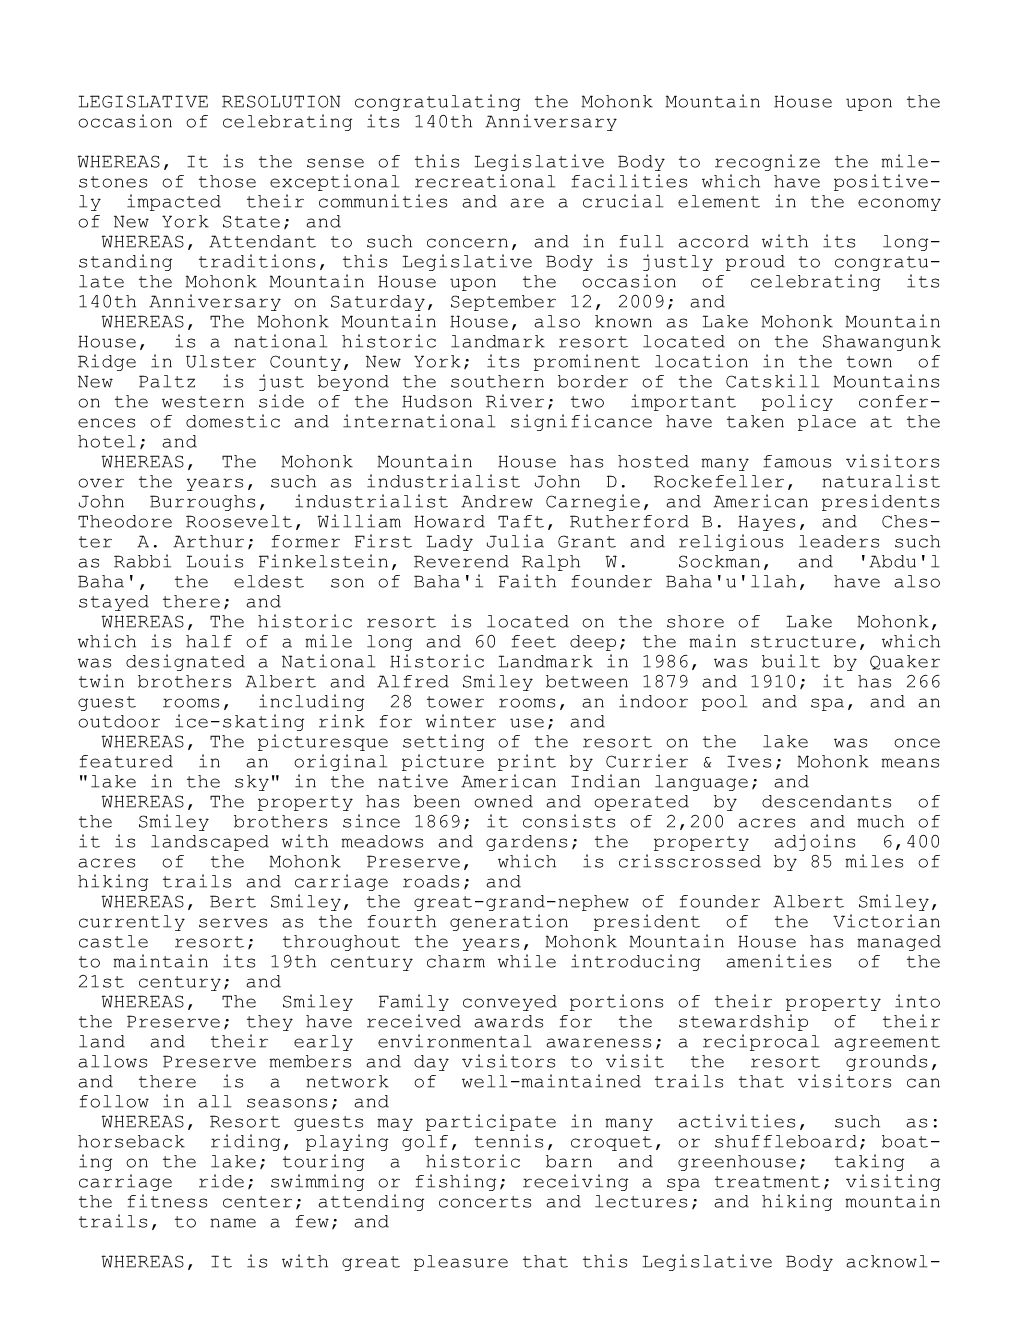 LEGISLATIVE RESOLUTION Congratulating the Mohonk Mountain House Upon the Occasion of Celebrating Its 140Th Anniversary